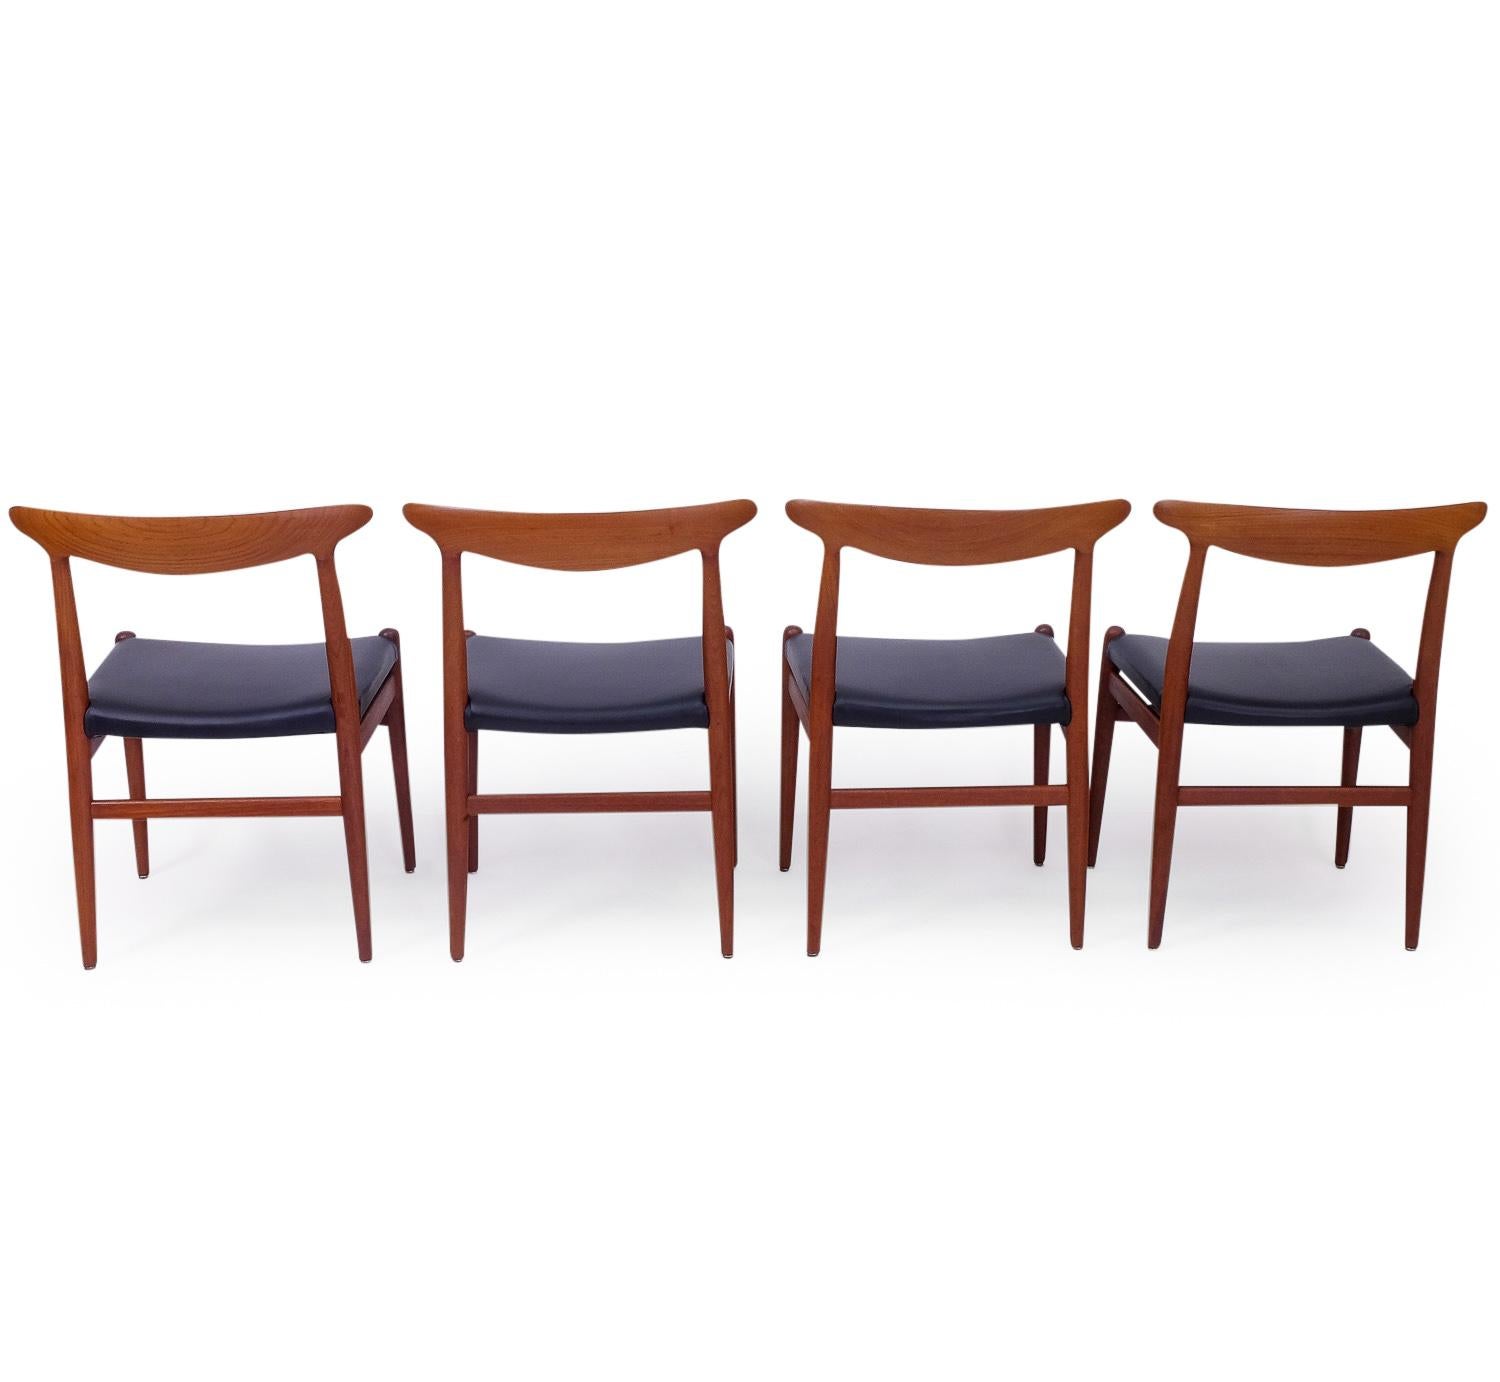 Mid-20th Century Hans Wegner W2 Chairs in Teak, Set of 4 For Sale